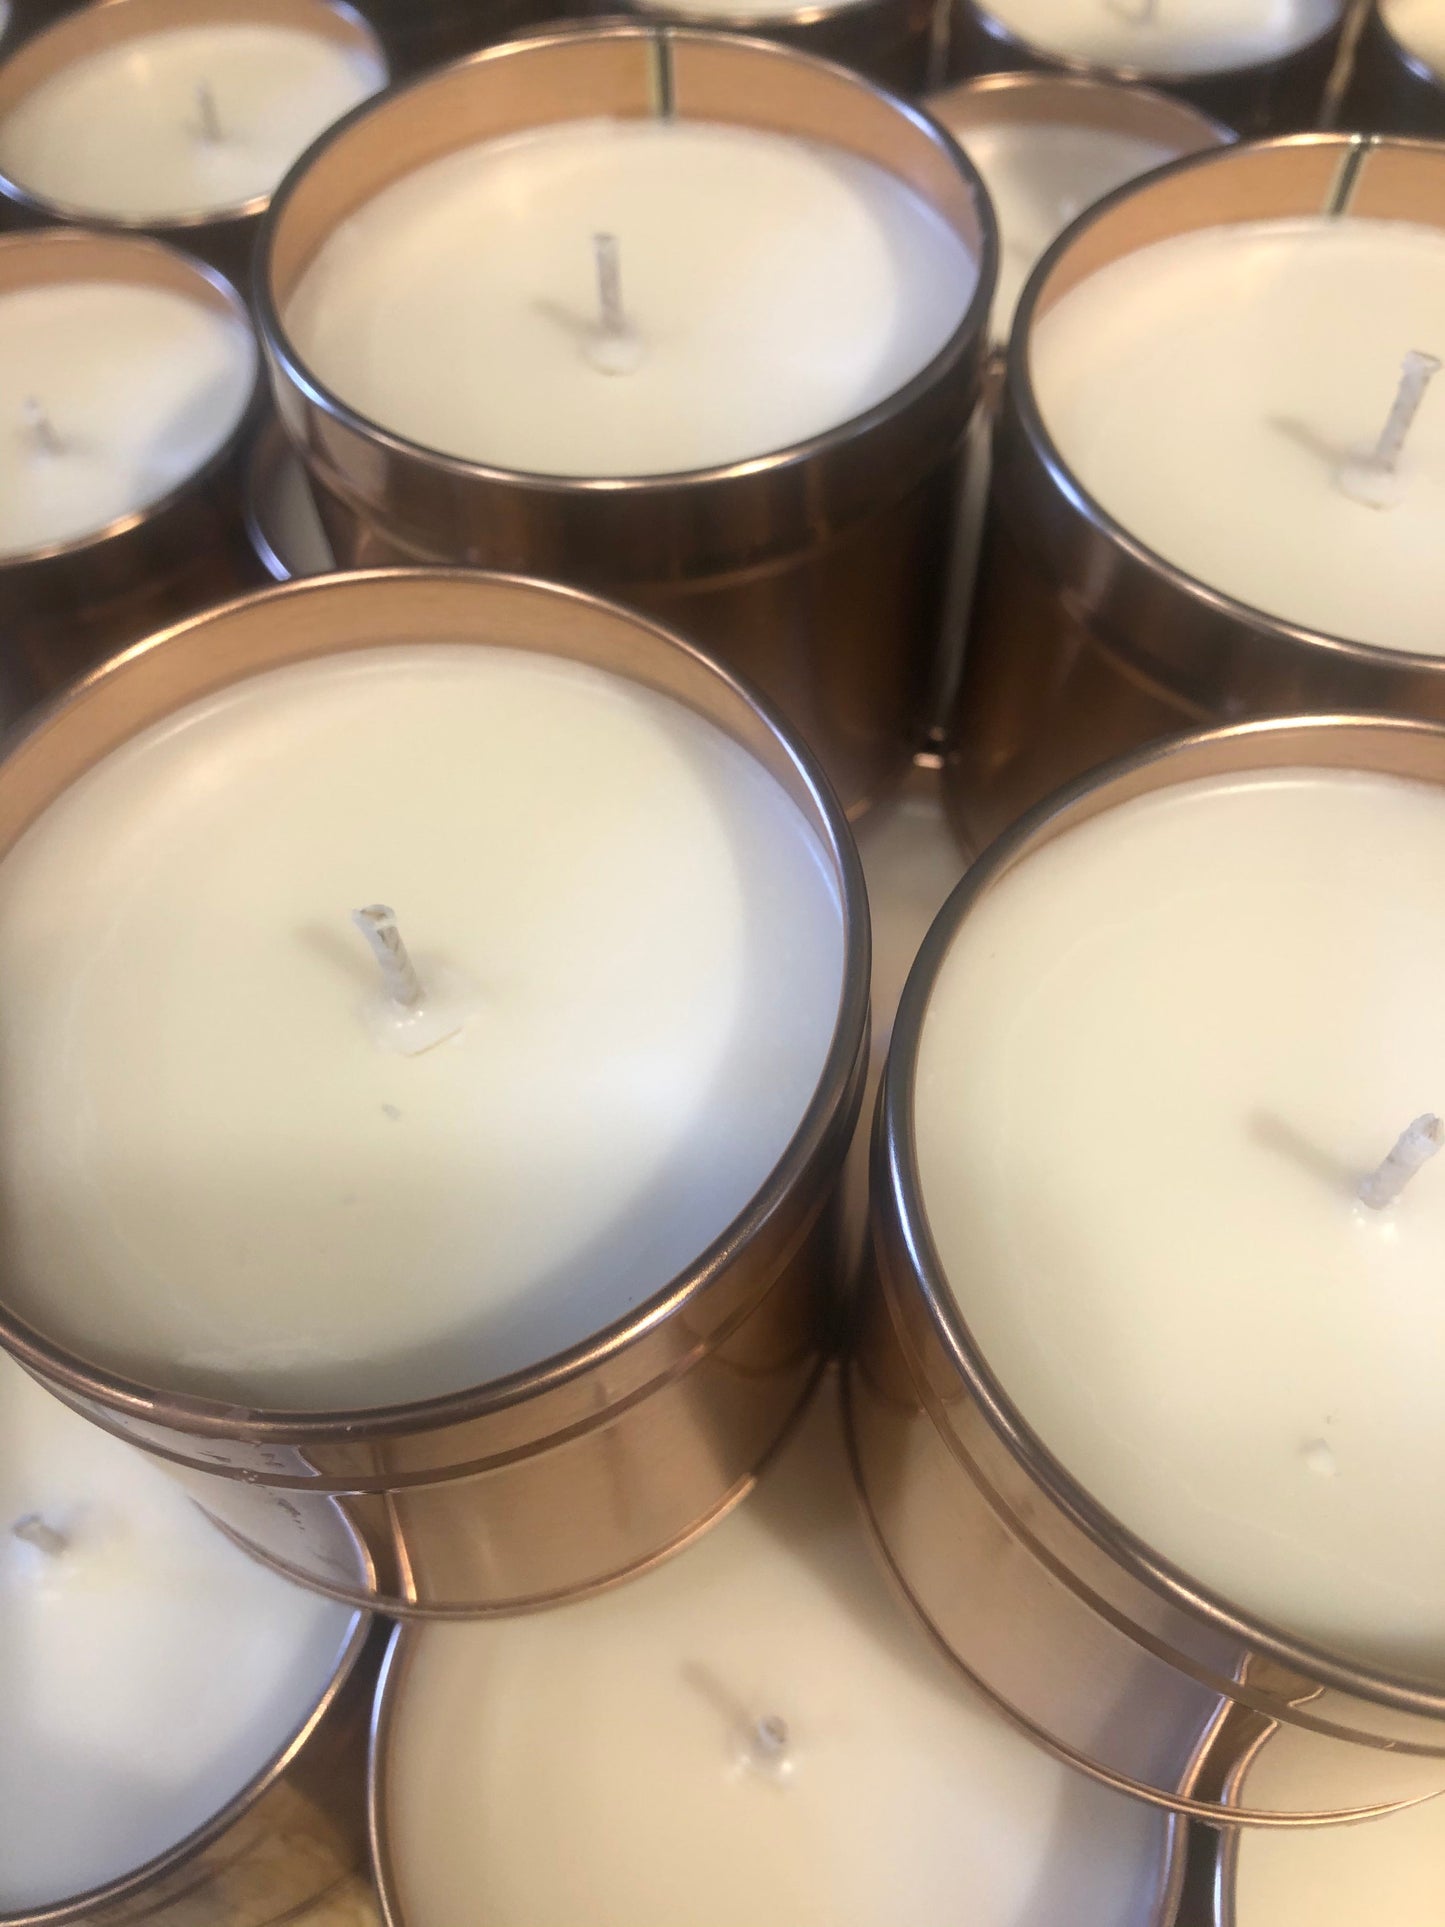 Cariad Copper tin scented candle - perfect for a sweetheart.